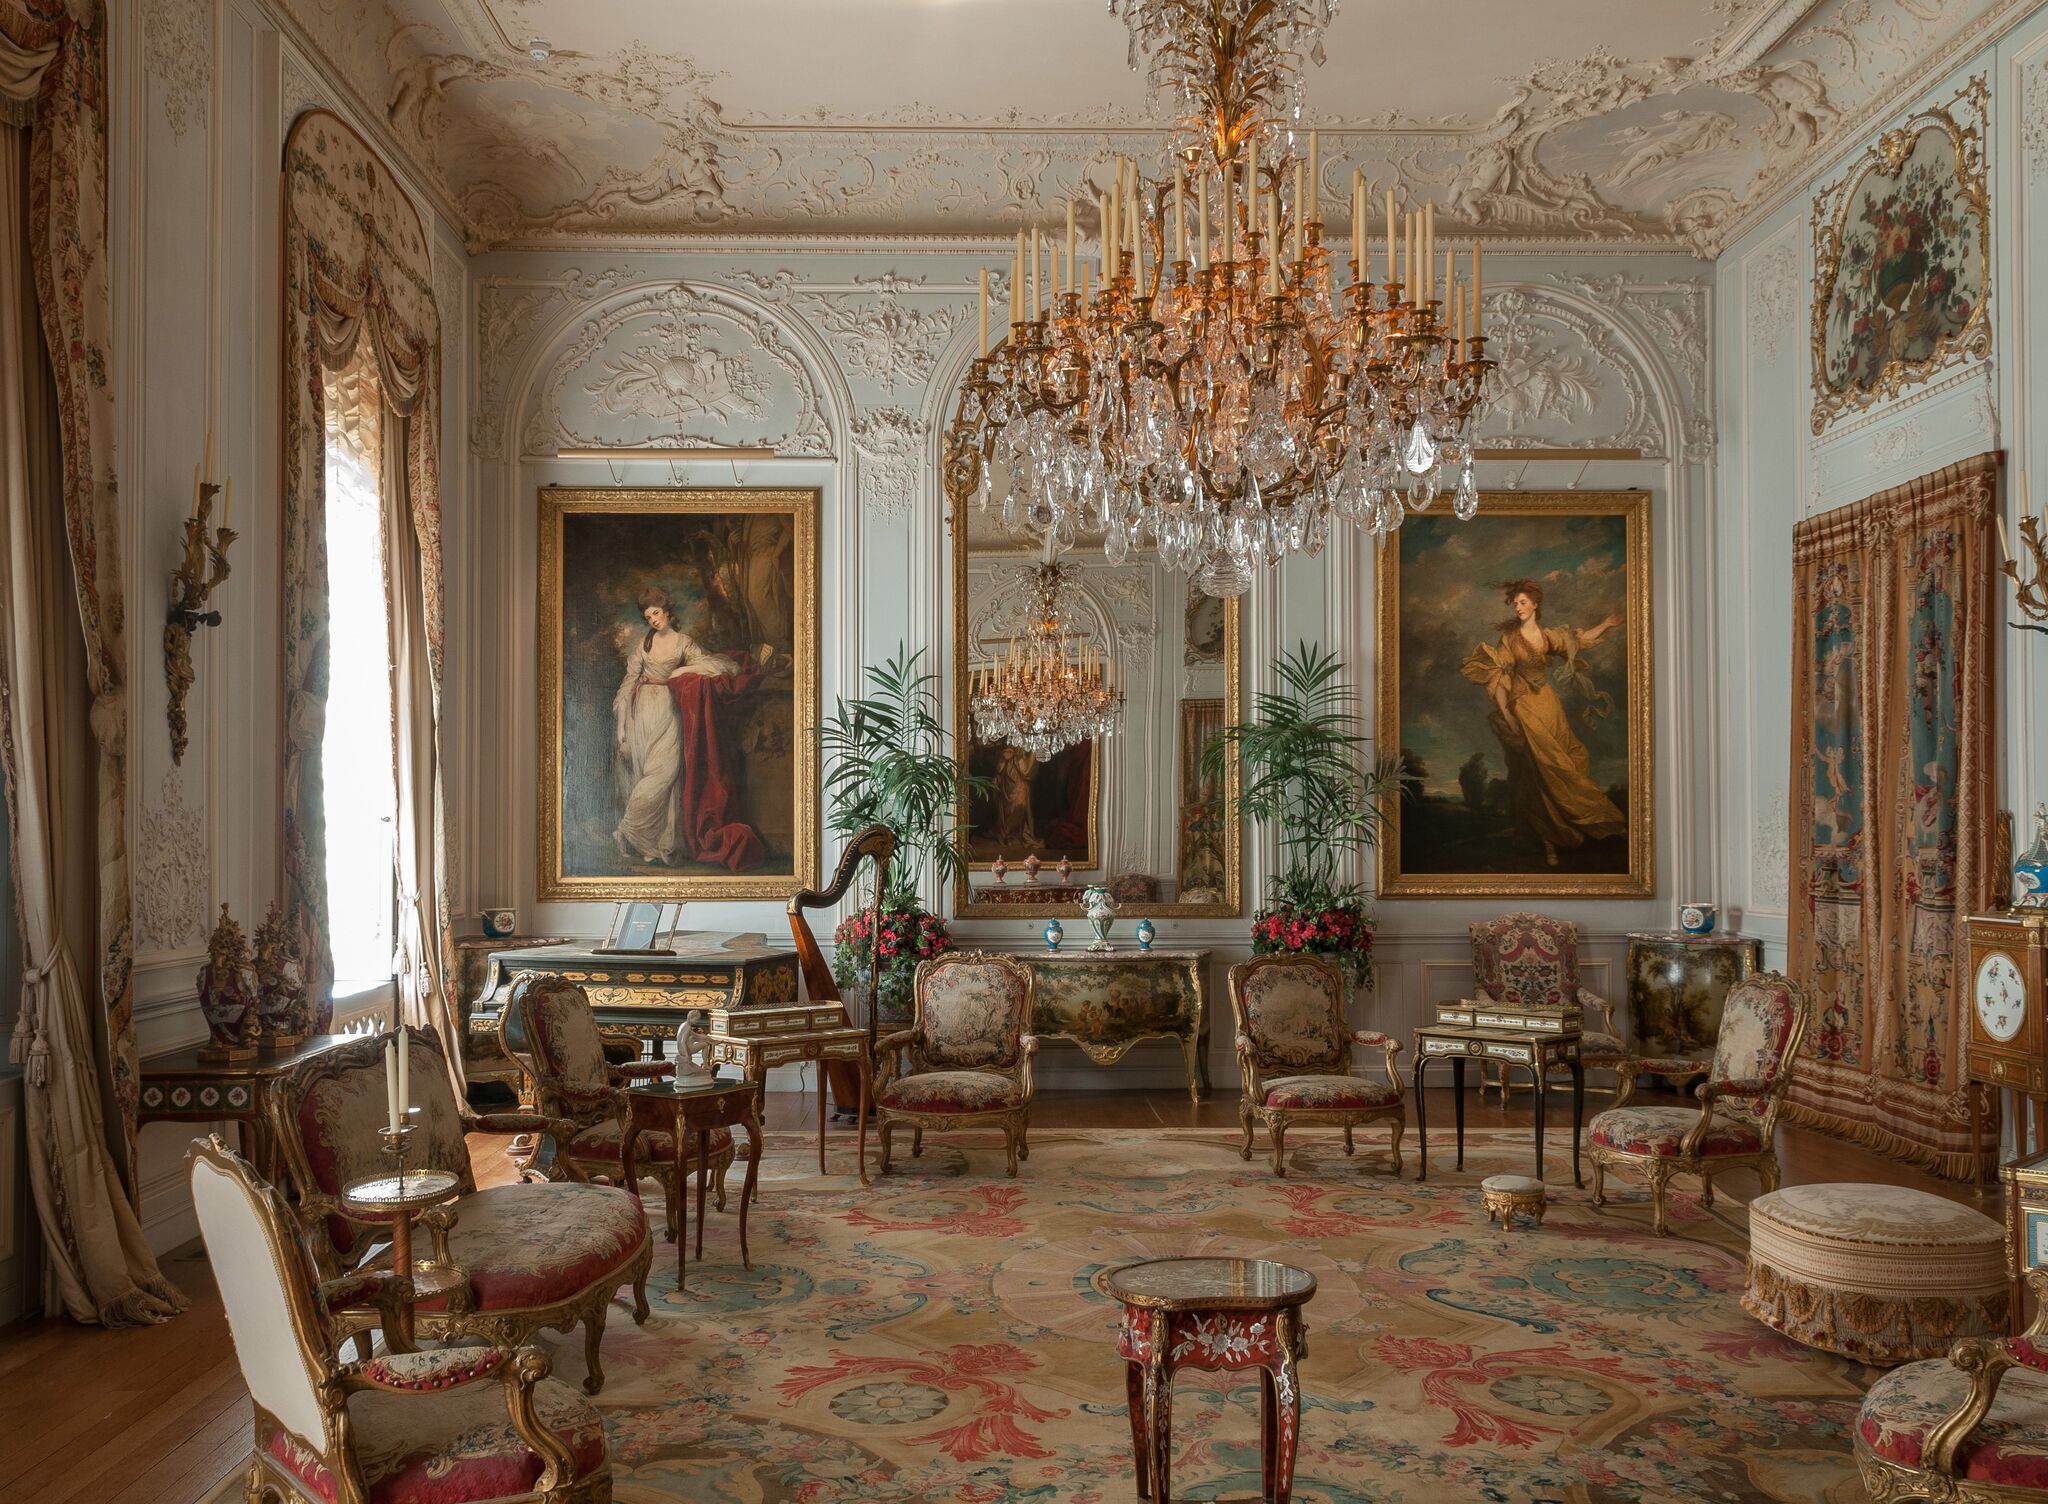 The Grey Drawing Room at Waddesdon Manor. (Chris Lacey (c) National Trust Waddesdon Manor)